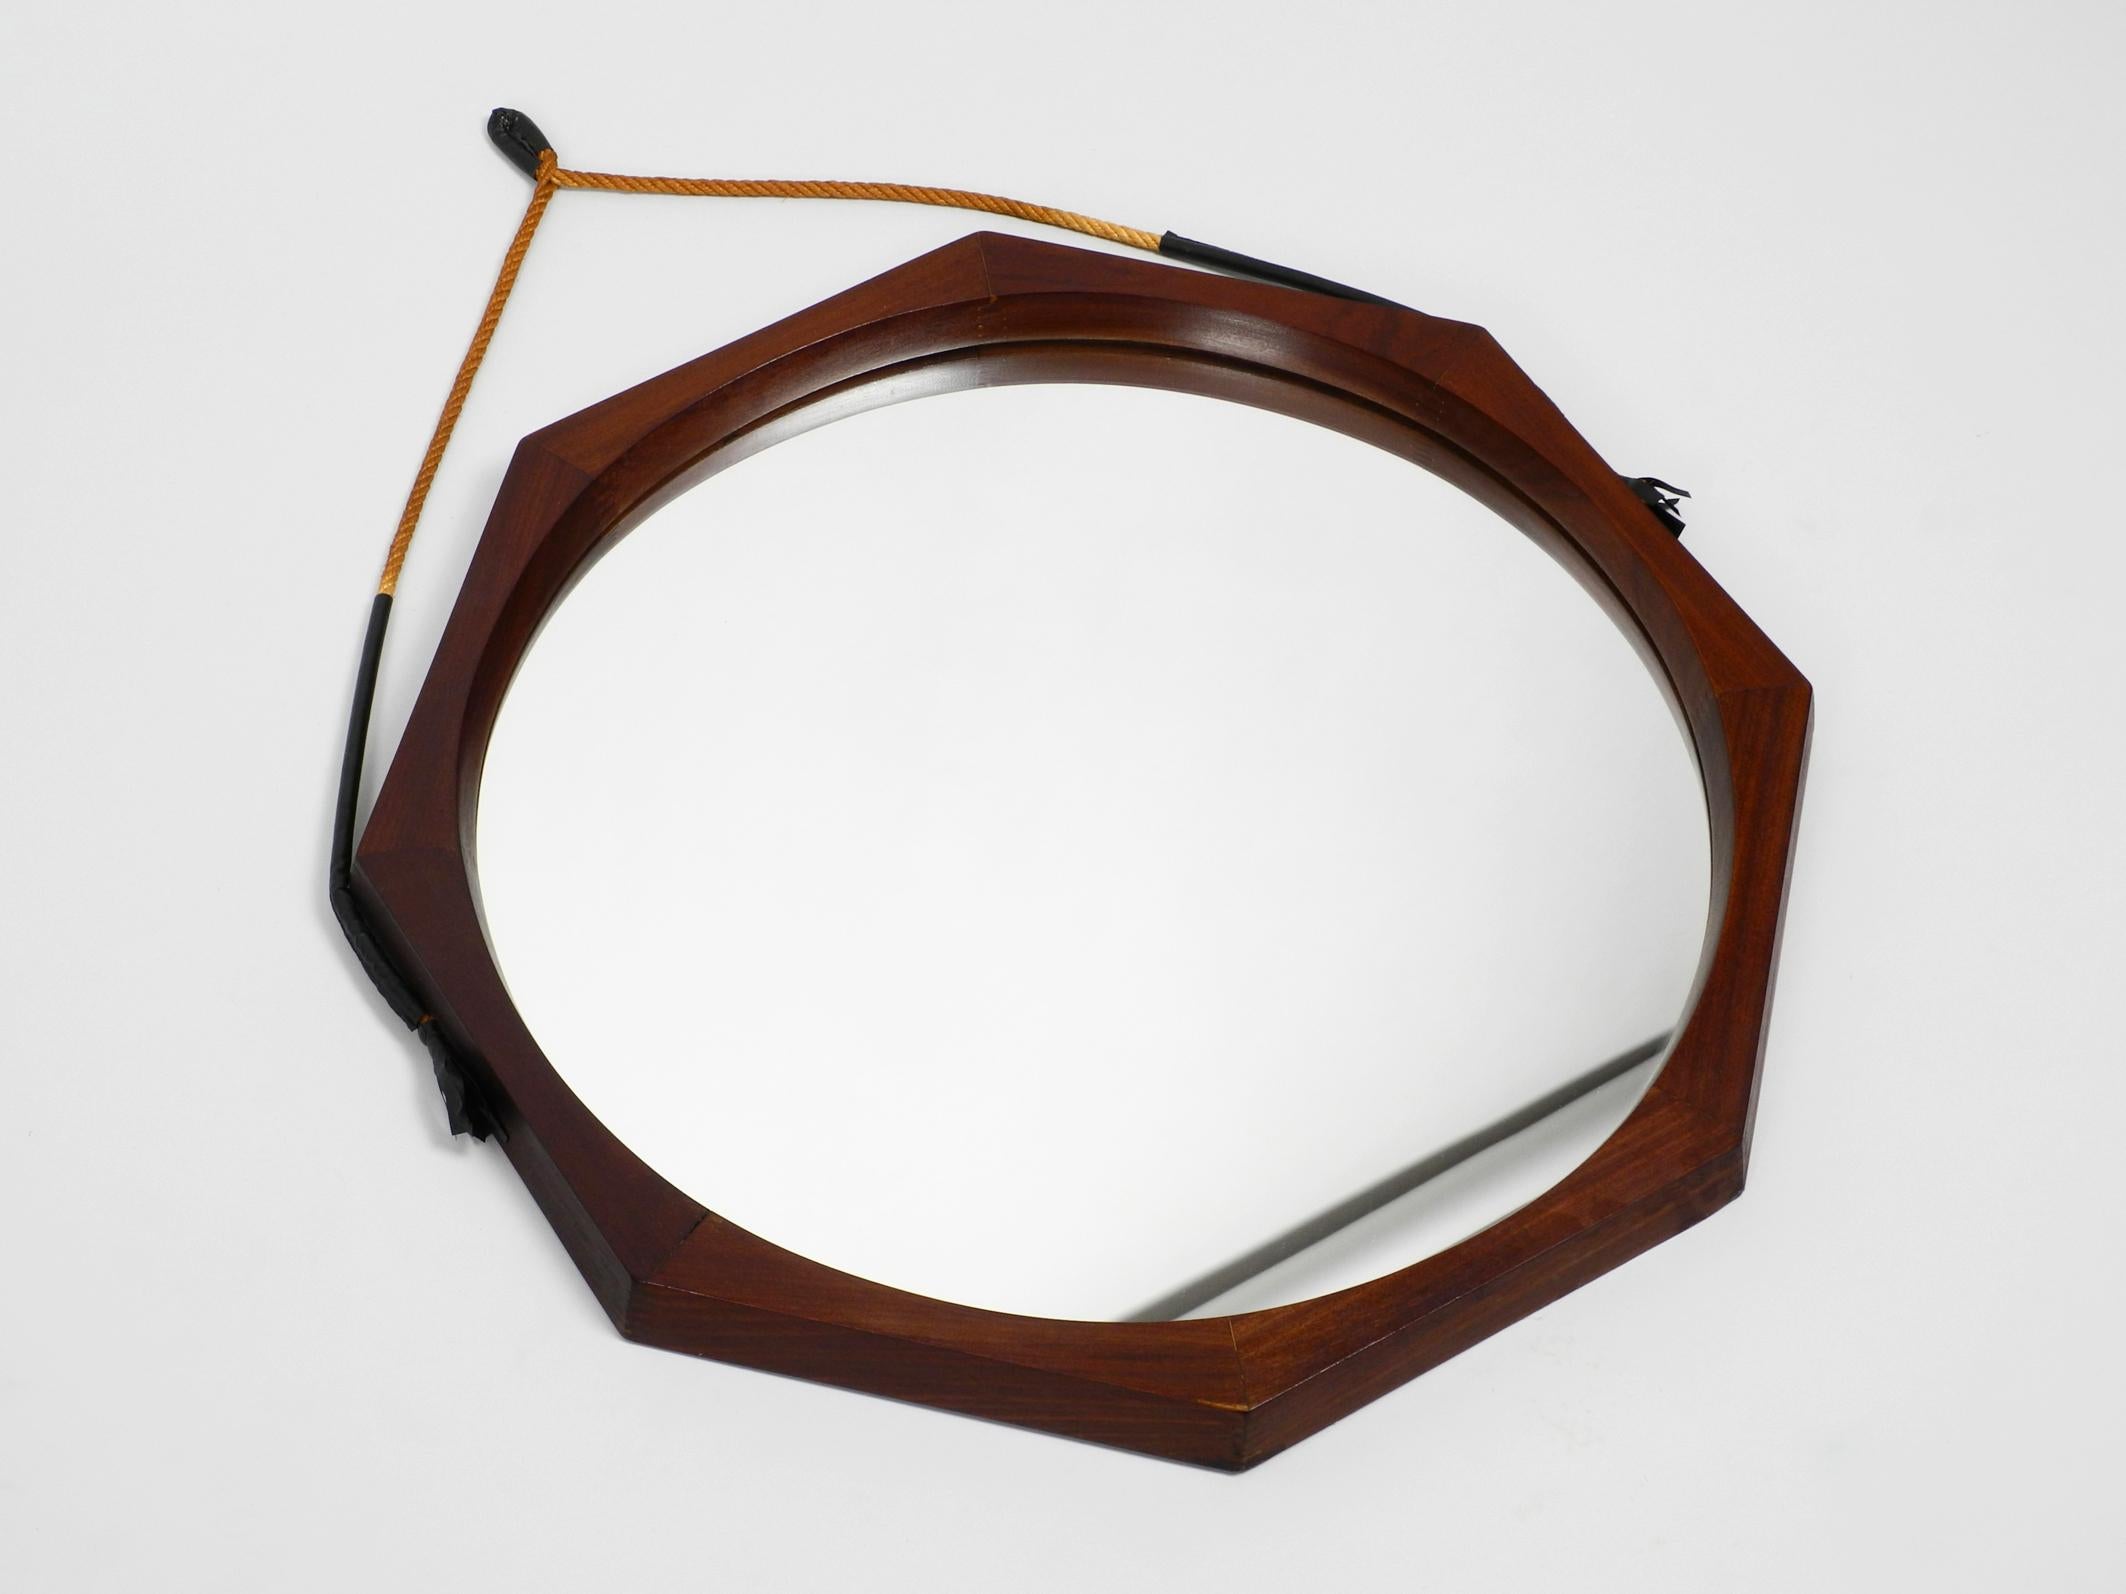 Original 1960s large beautiful wall mirror with a wide 8-square teak frame.
Made in Italy.
The original thick rope is made of jute or sisal, it is undamaged and firm.
Very high quality workmanship in a minimalist Italian design.
100% original